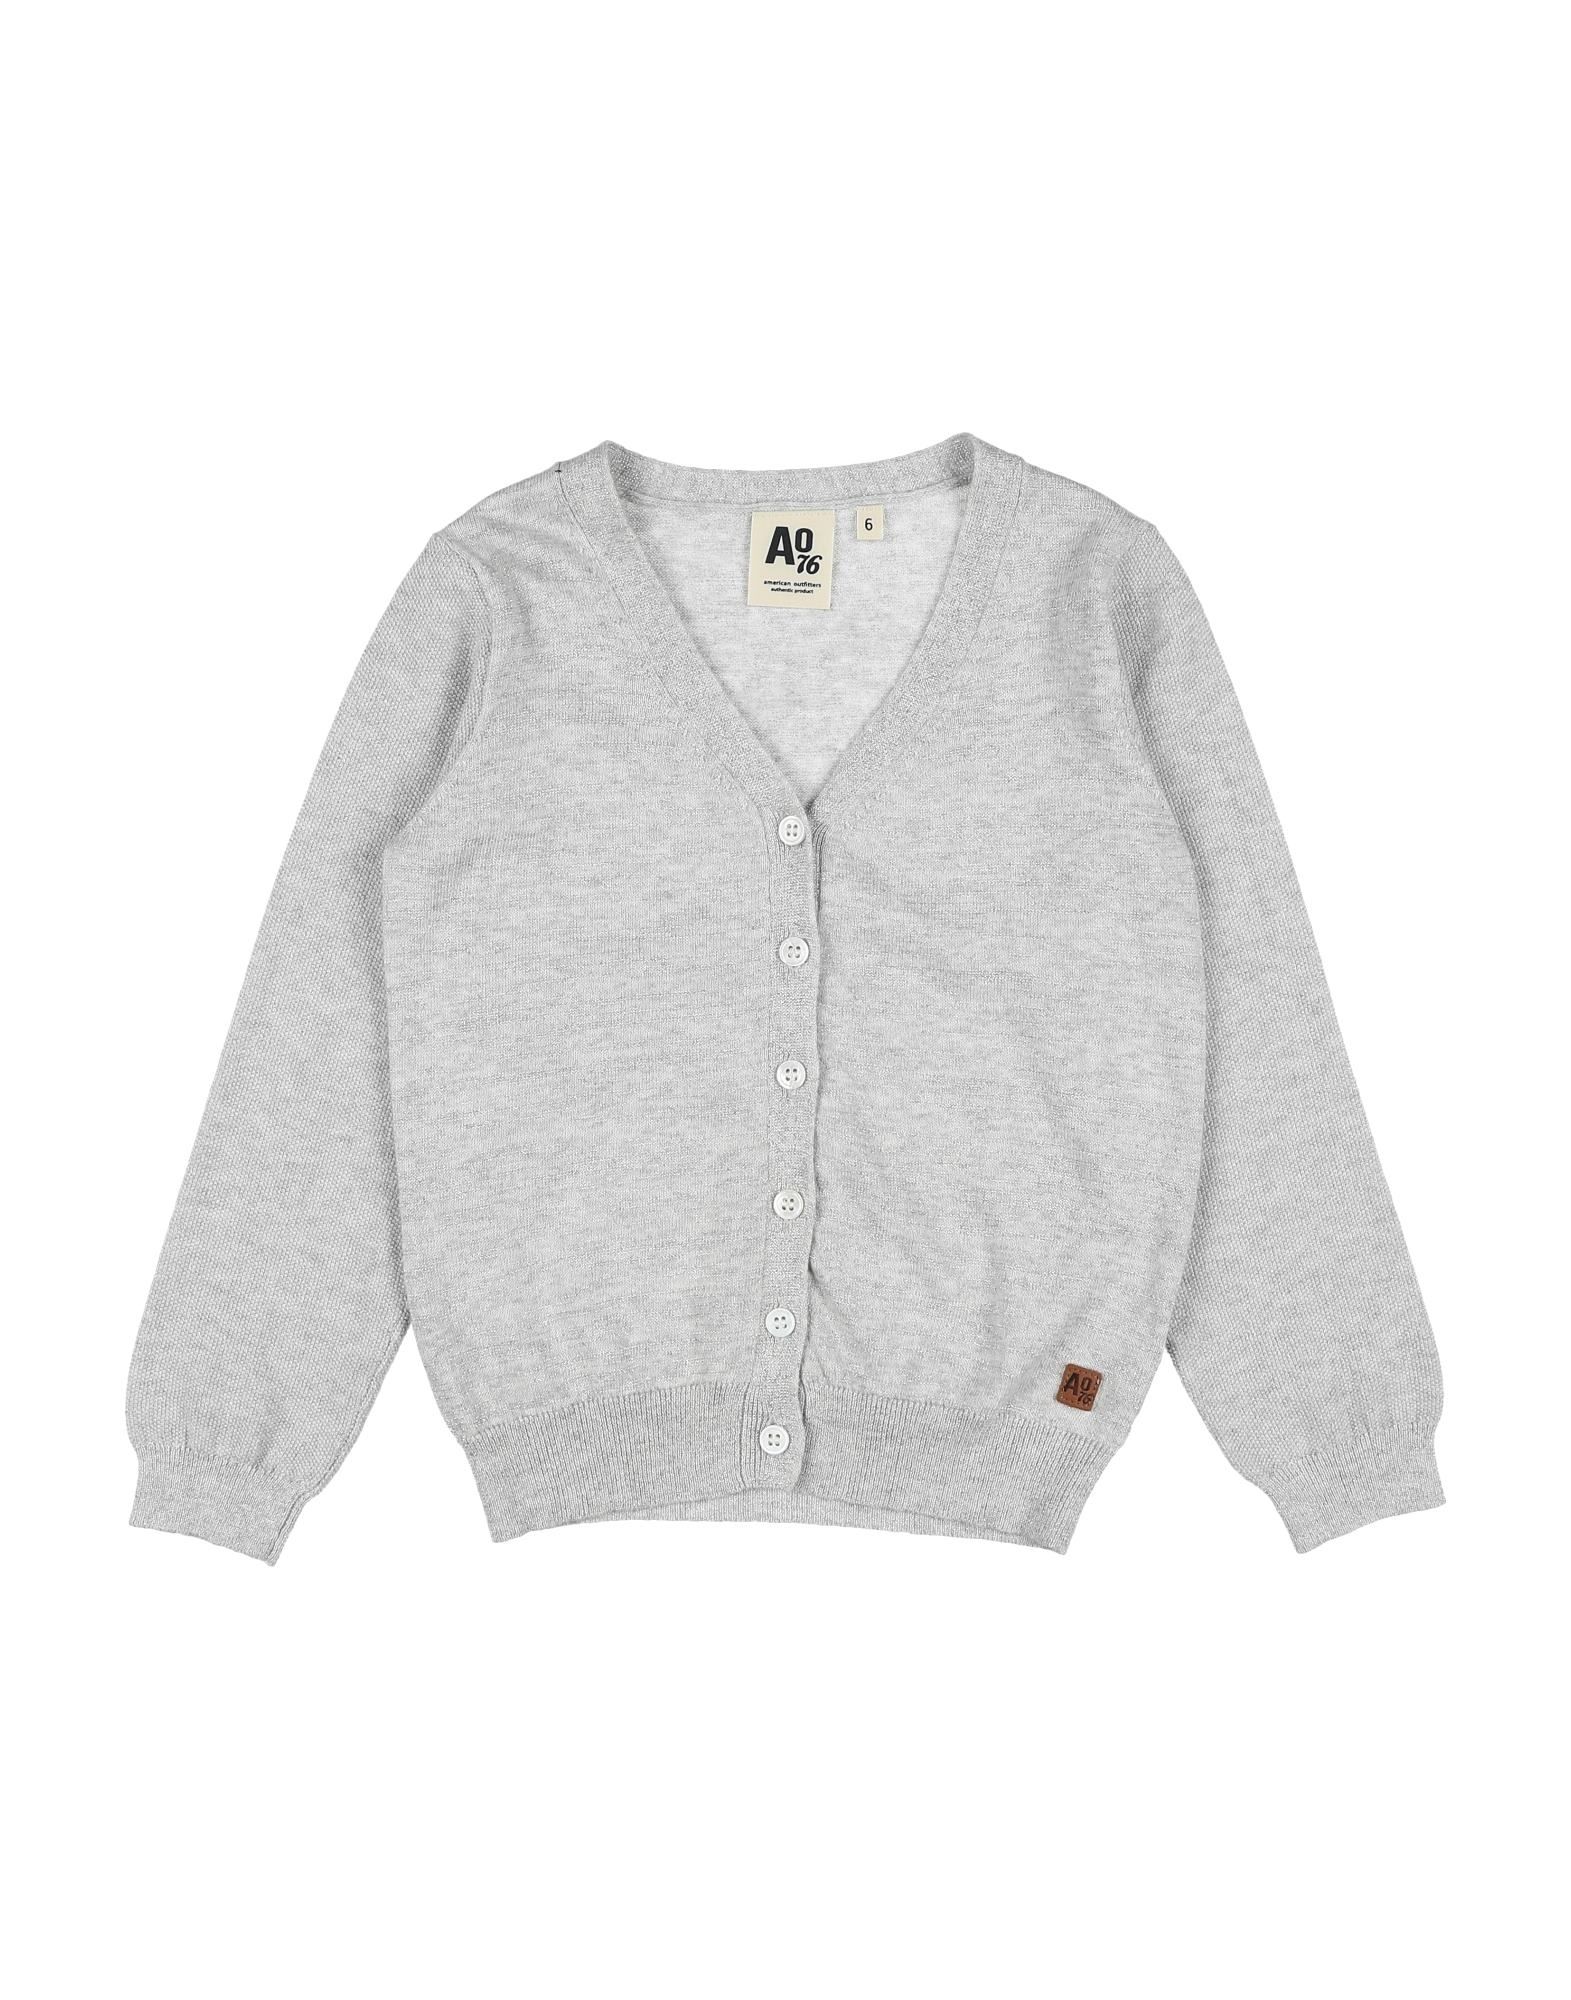 American Outfitters Kids' Cardigans In Light Grey